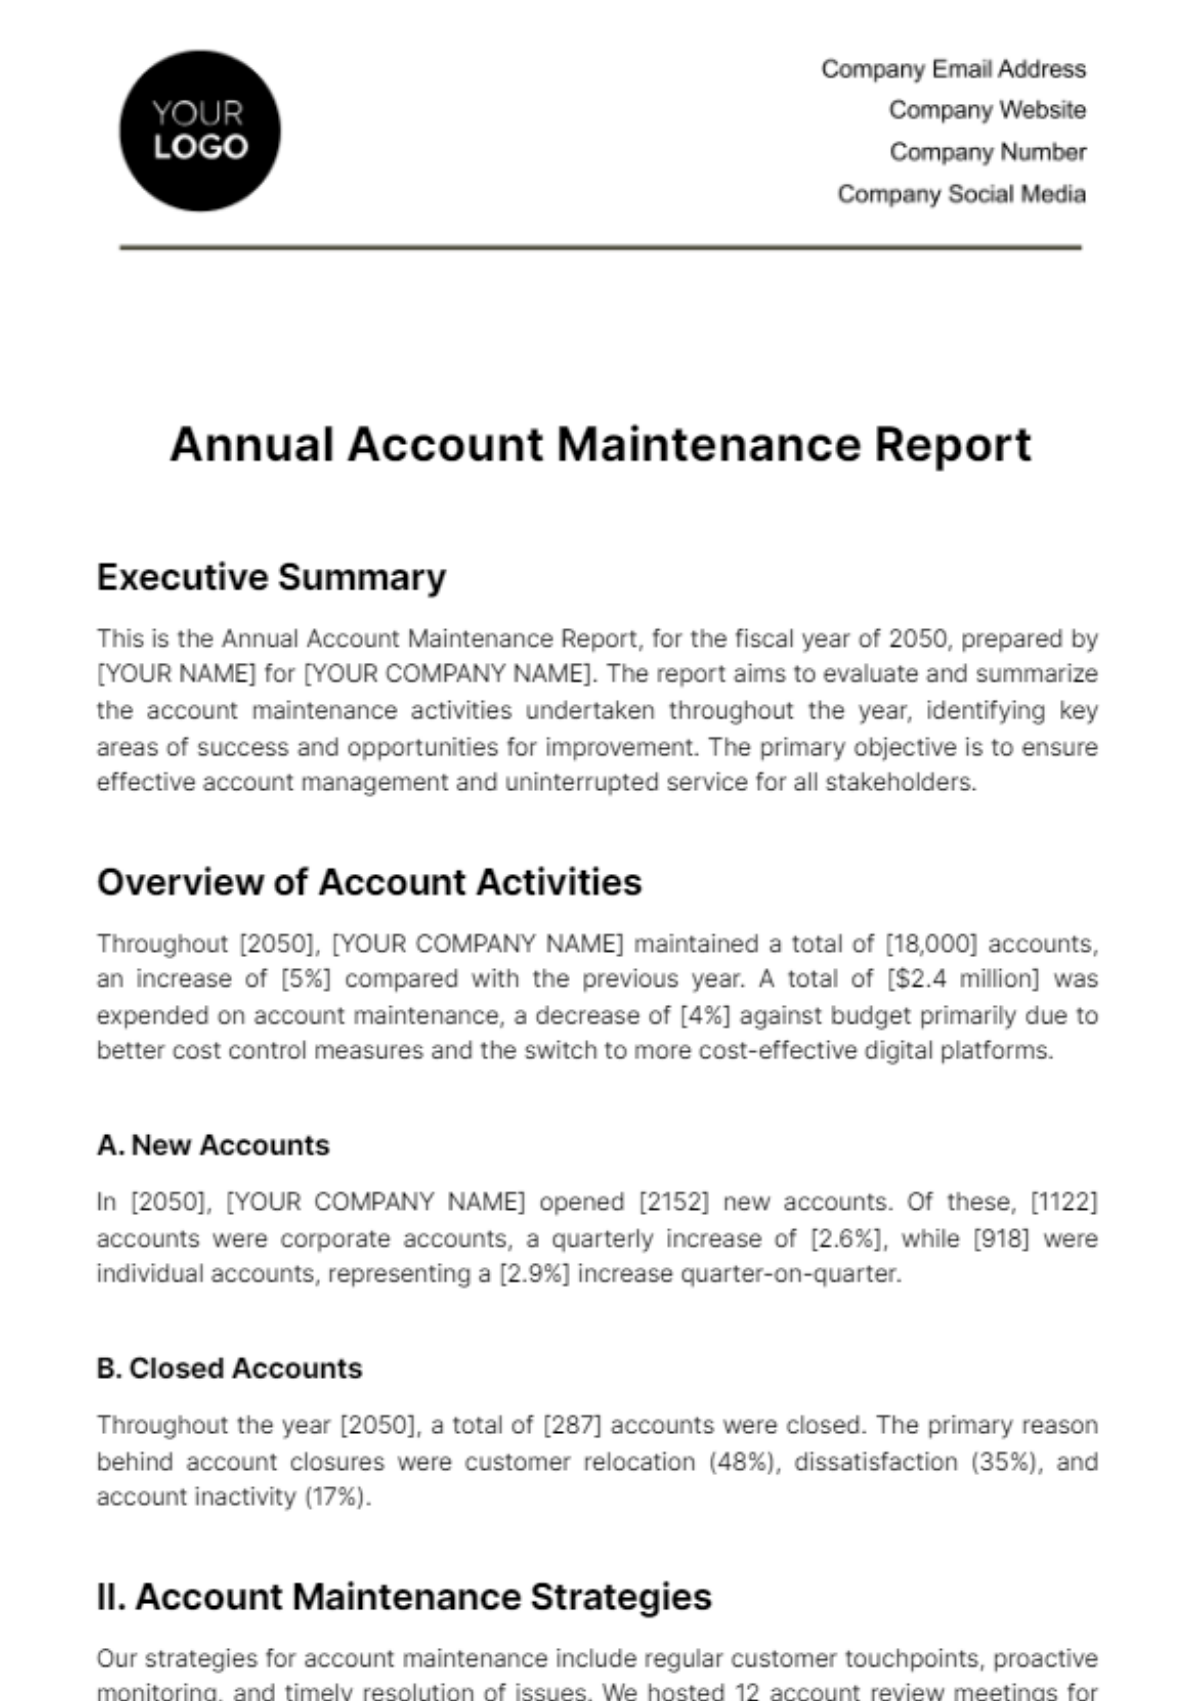 Free Annual Account Maintenance Report Template